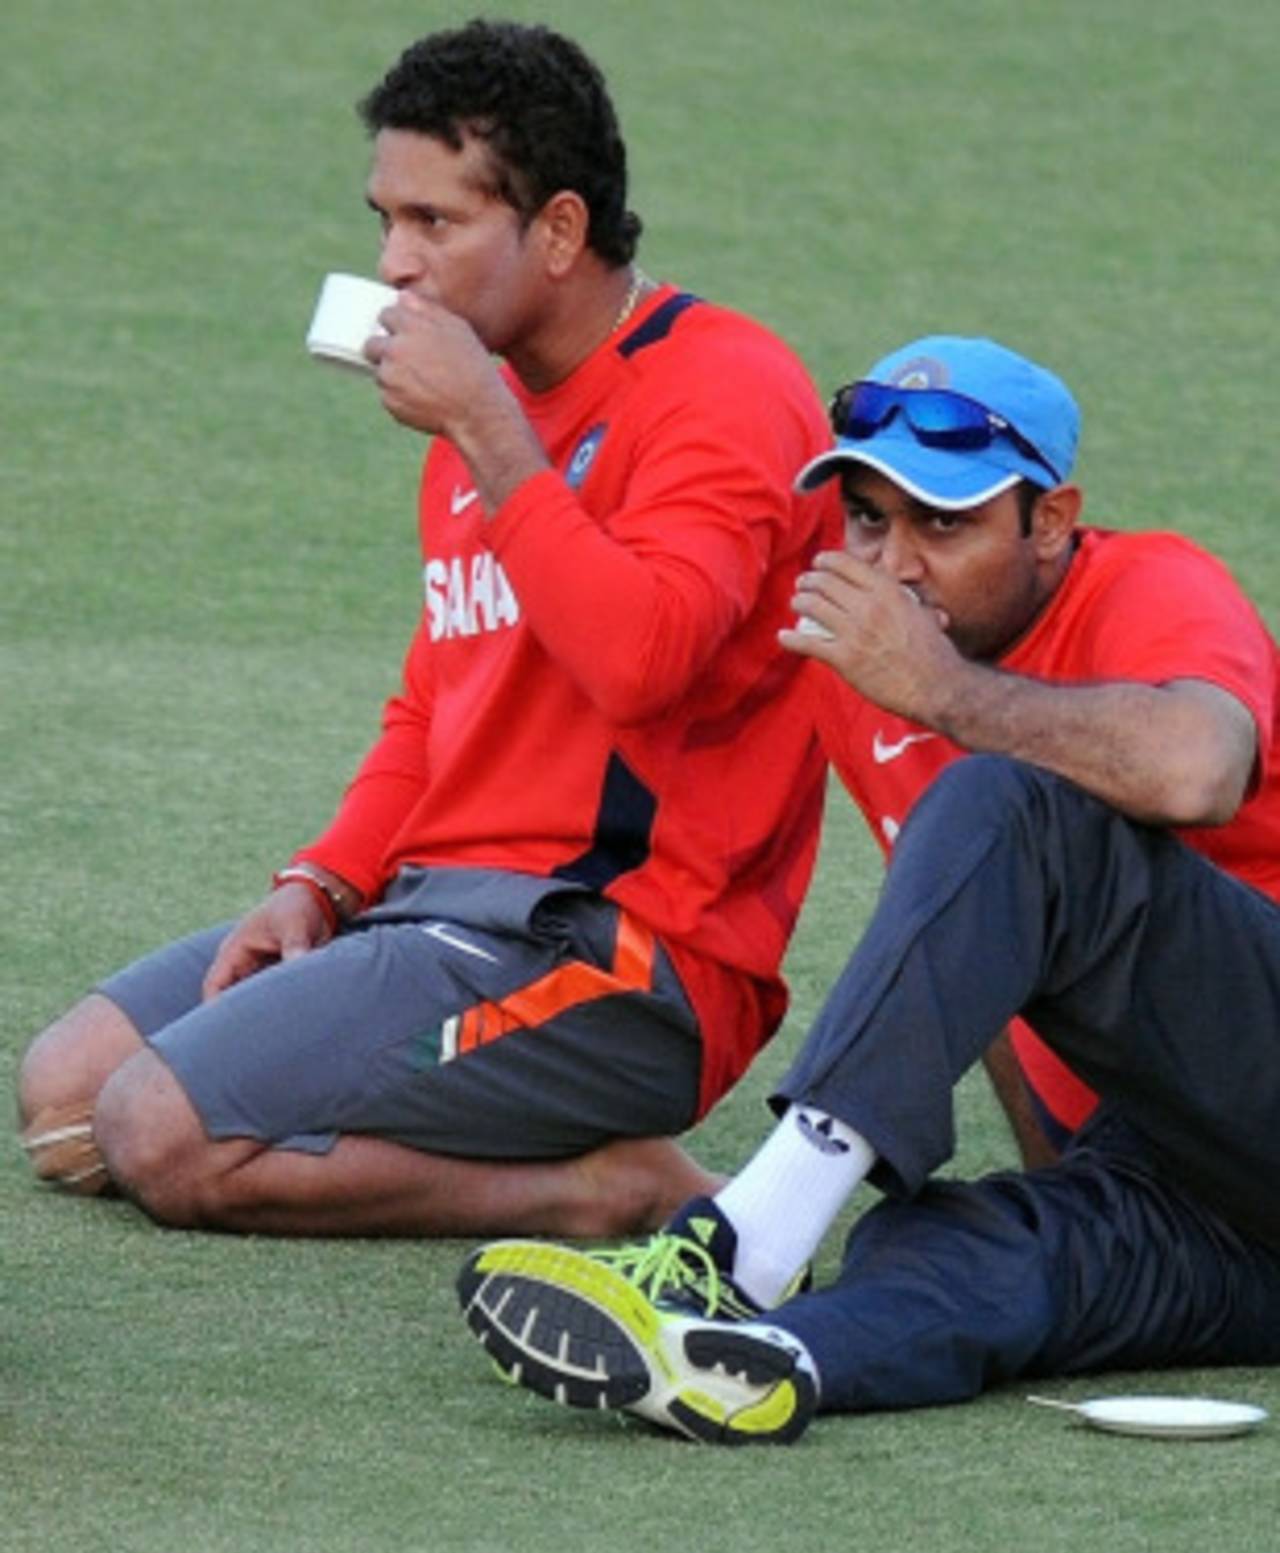 Sachin Tendulkar and Virender Sehwag sip some tea during a break from training, Mohali, March 27, 2010